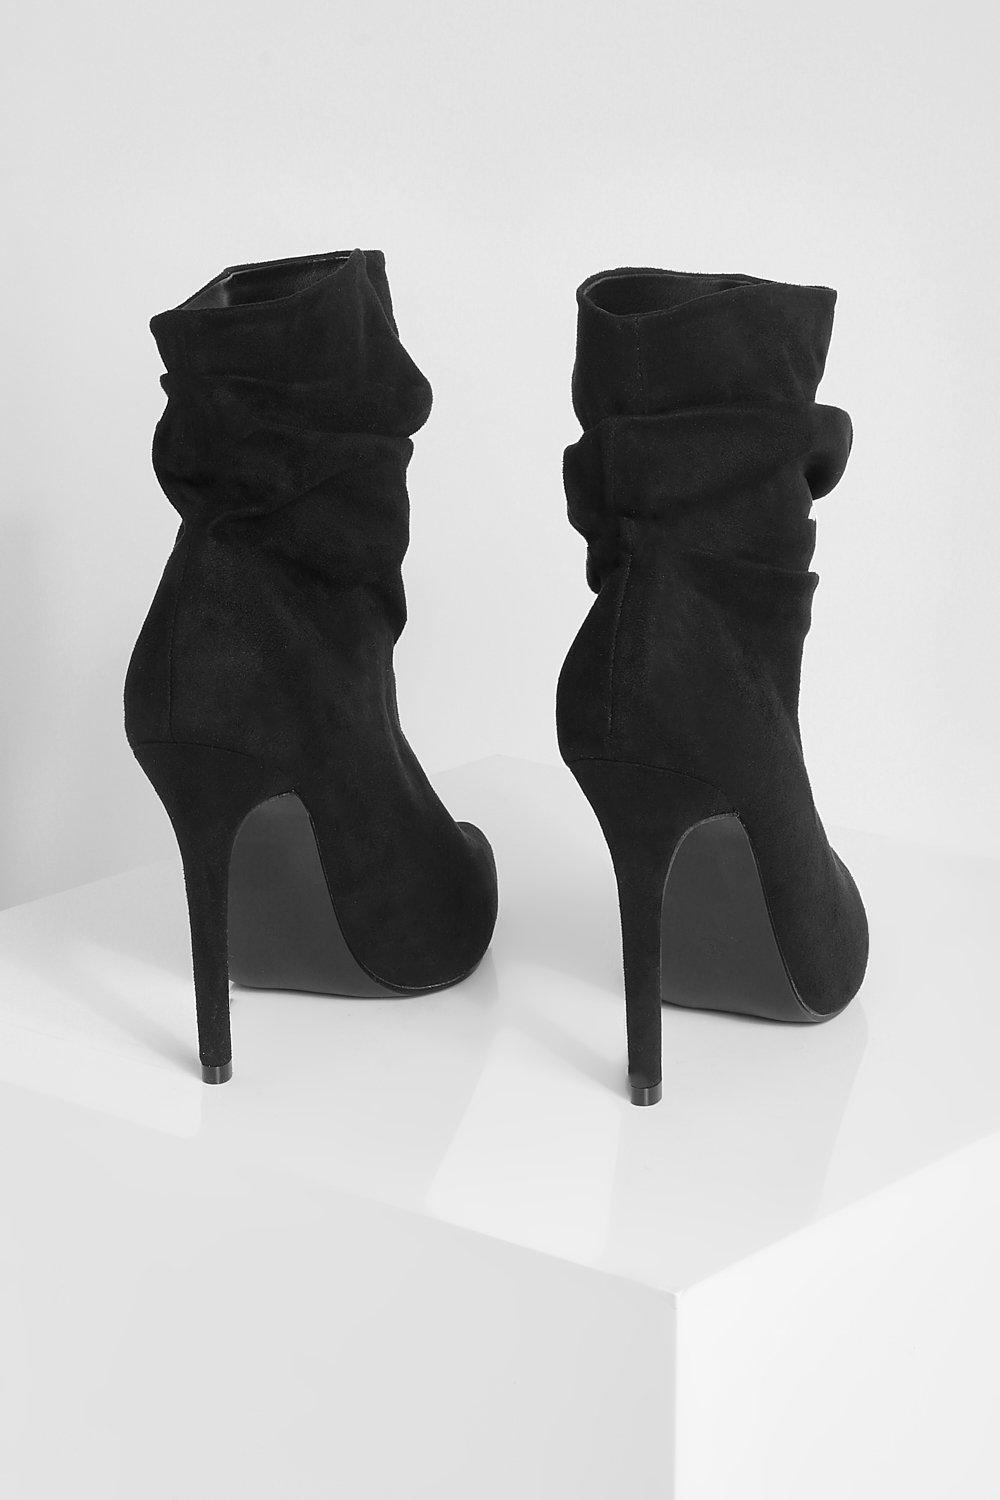 Ruched Stiletto Ankle Boots